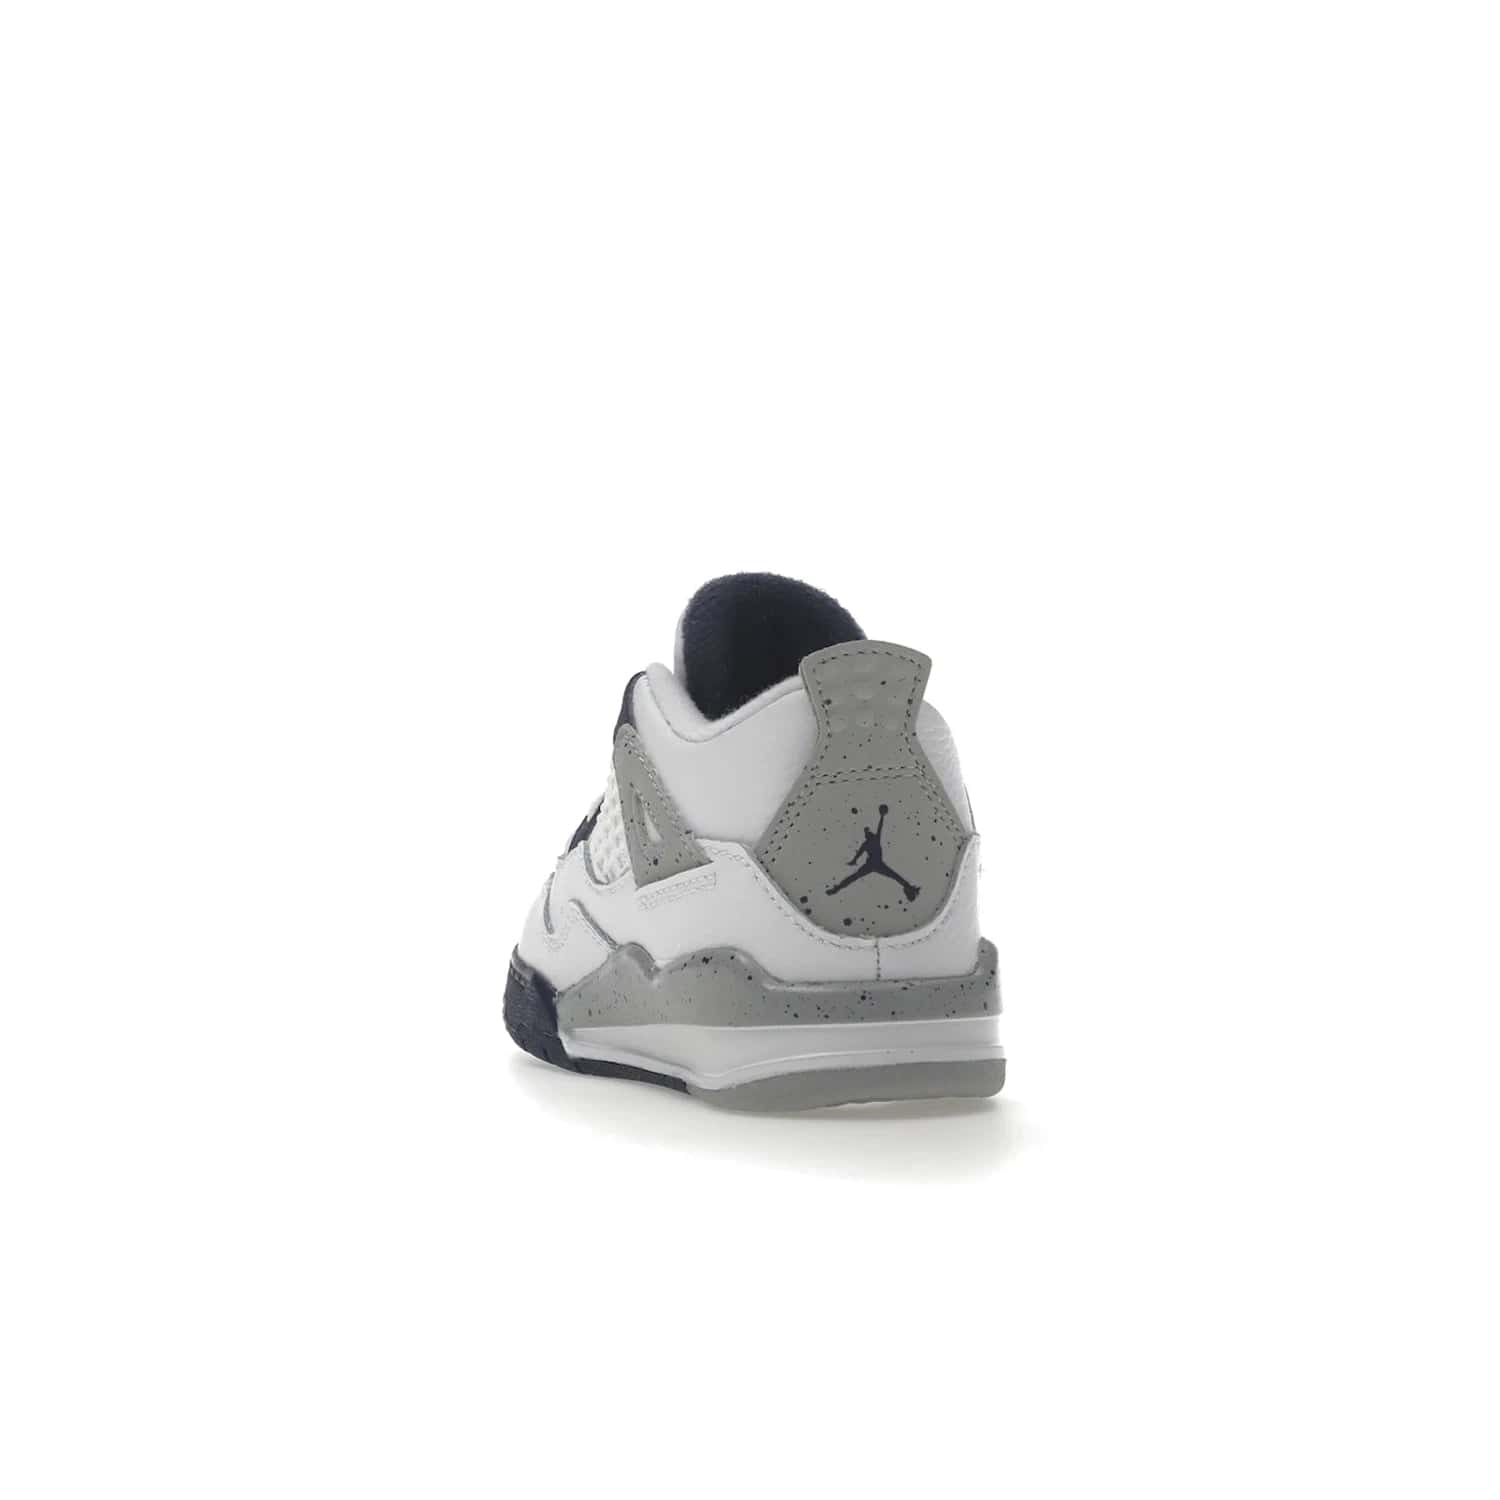 Jordan 4 Retro Midnight Navy (TD) - Image 26 - Only at www.BallersClubKickz.com - Introducing the Jordan 4 Retro Midnight Navy (TD) for kids. White leather upper with navy and grey accents plus fire red detailing. Perfect for everyday wear. Get yours before they sell out.